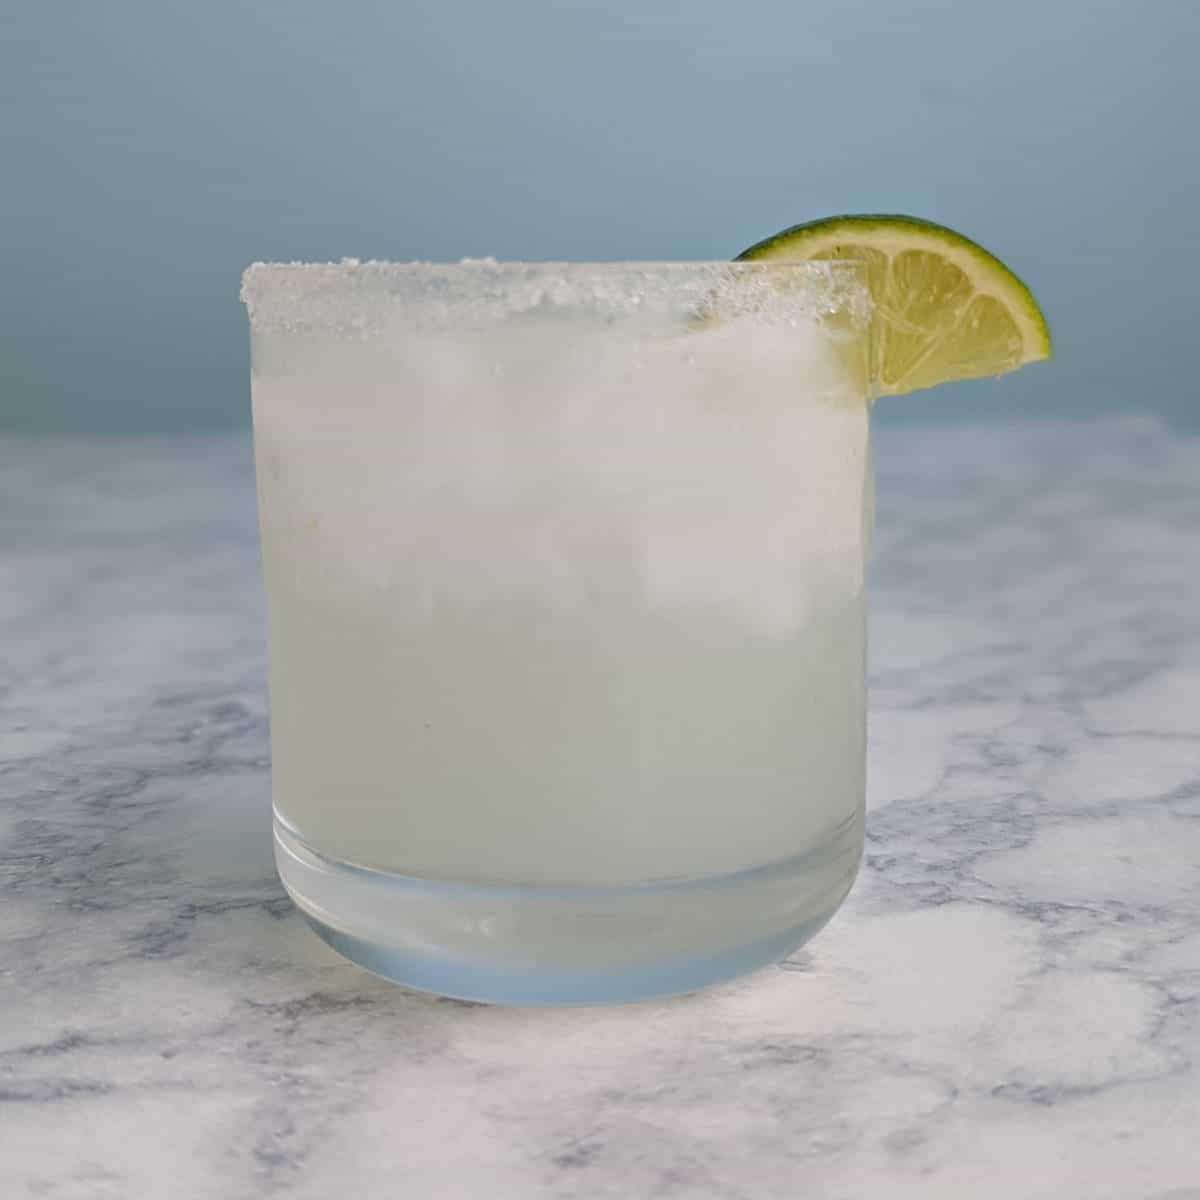 margarita in glass with lime garnish, square image